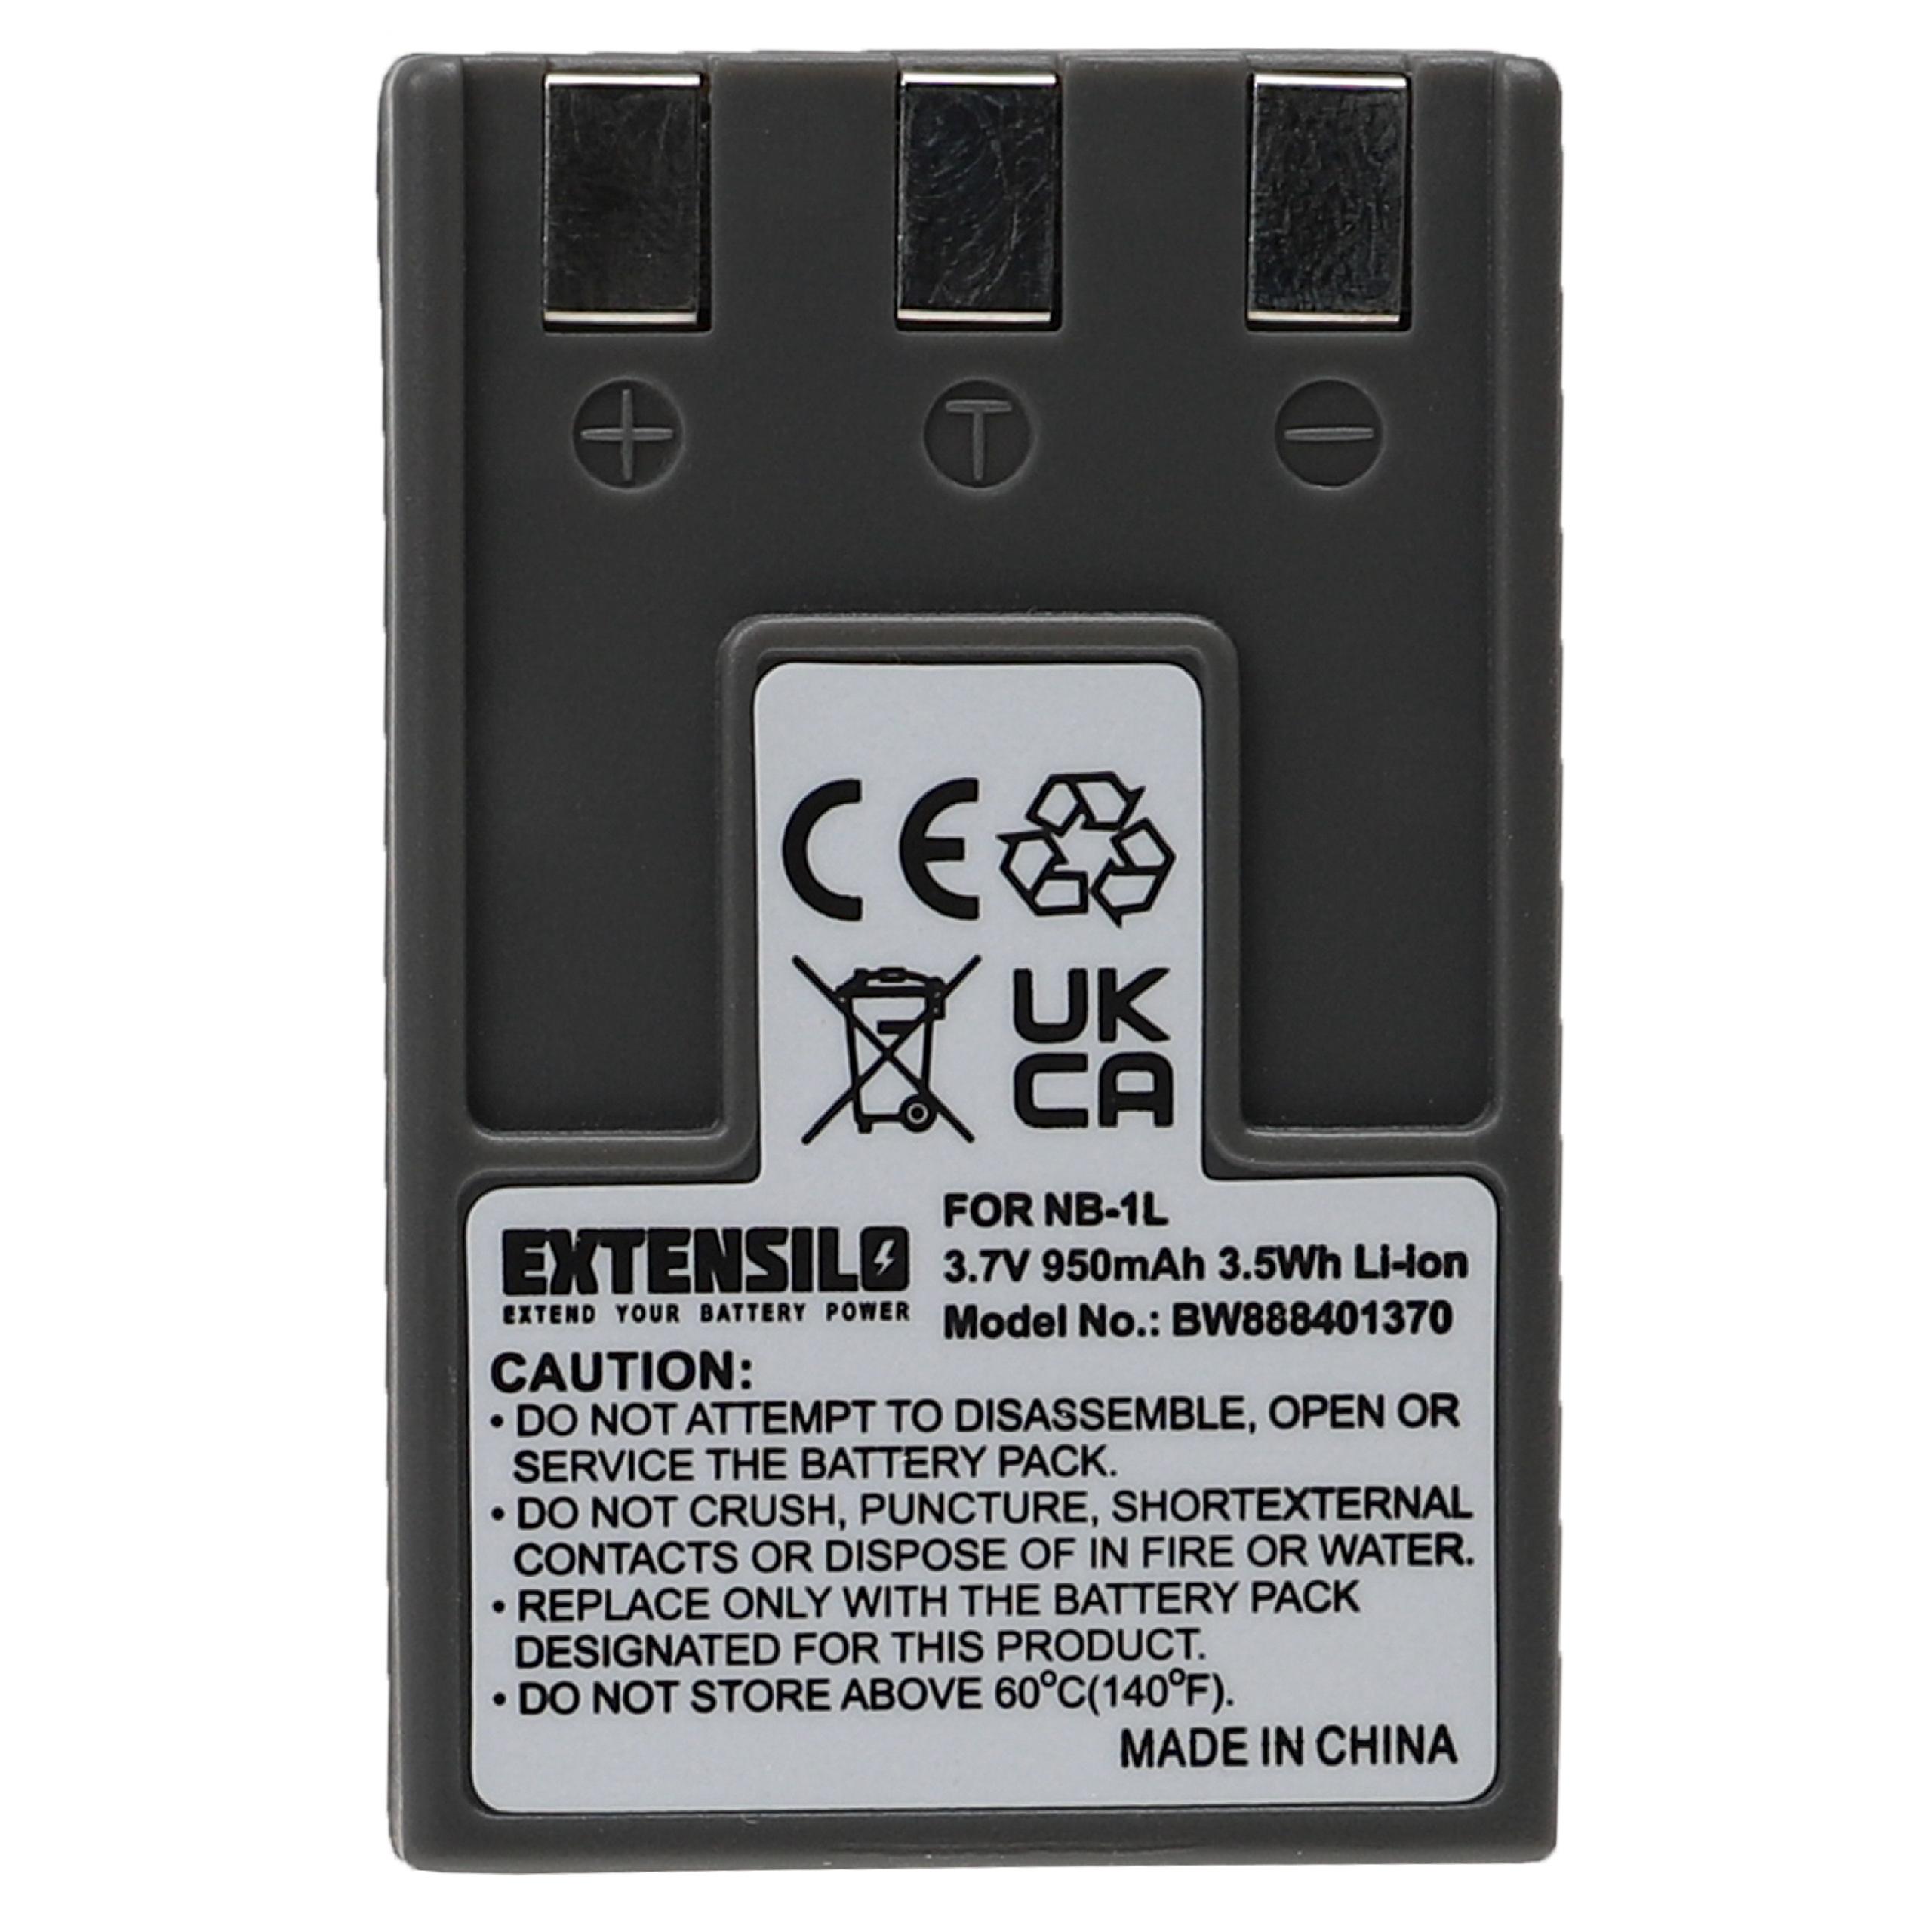 Battery Replacement for Canon NB-1L, NB-1LH - 950mAh, 3.7V, Li-Ion